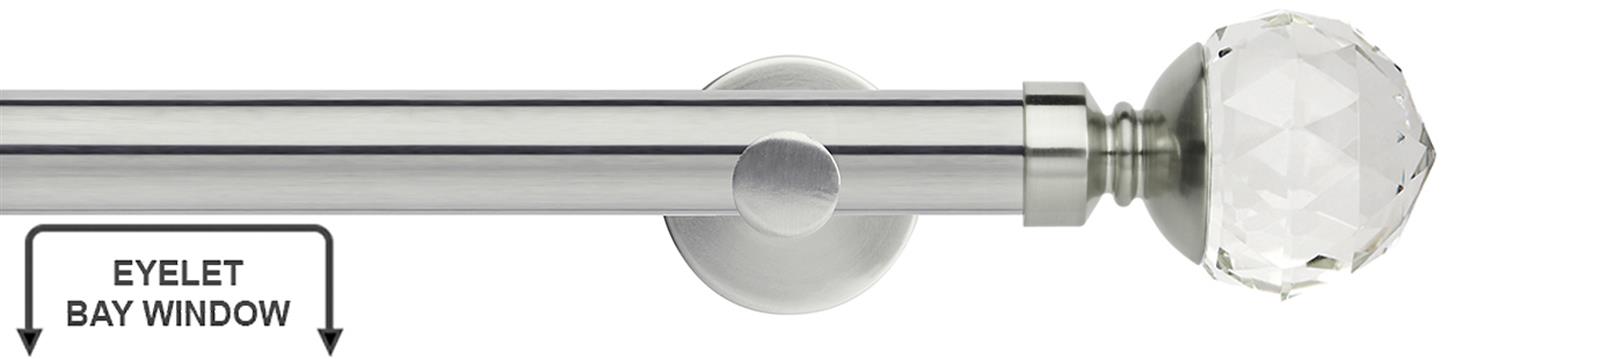 Neo Premium 28mm Eyelet Bay Window Pole Stainless Steel Clear Faceted Ball